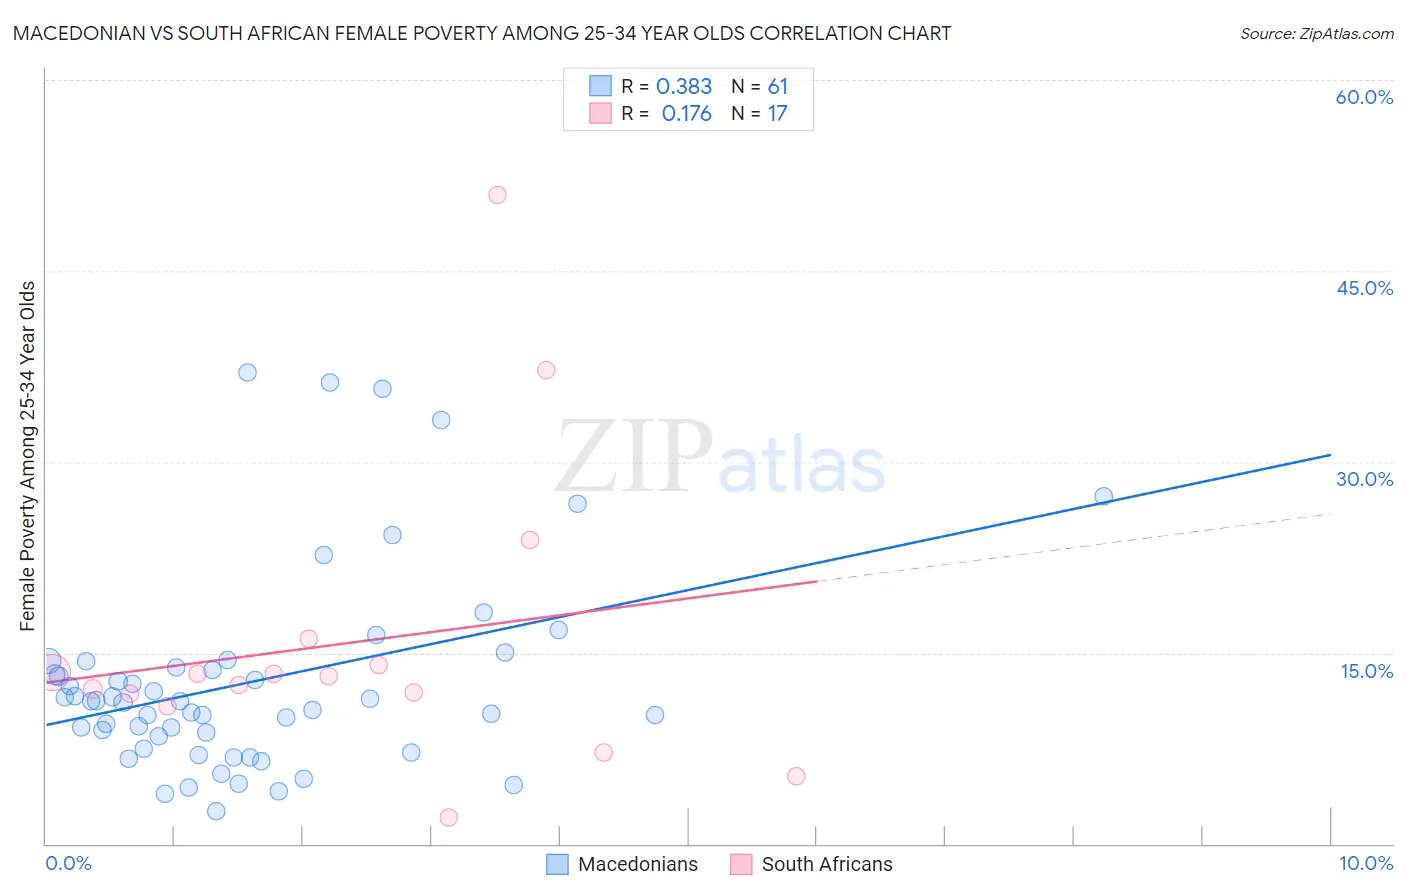 Macedonian vs South African Female Poverty Among 25-34 Year Olds